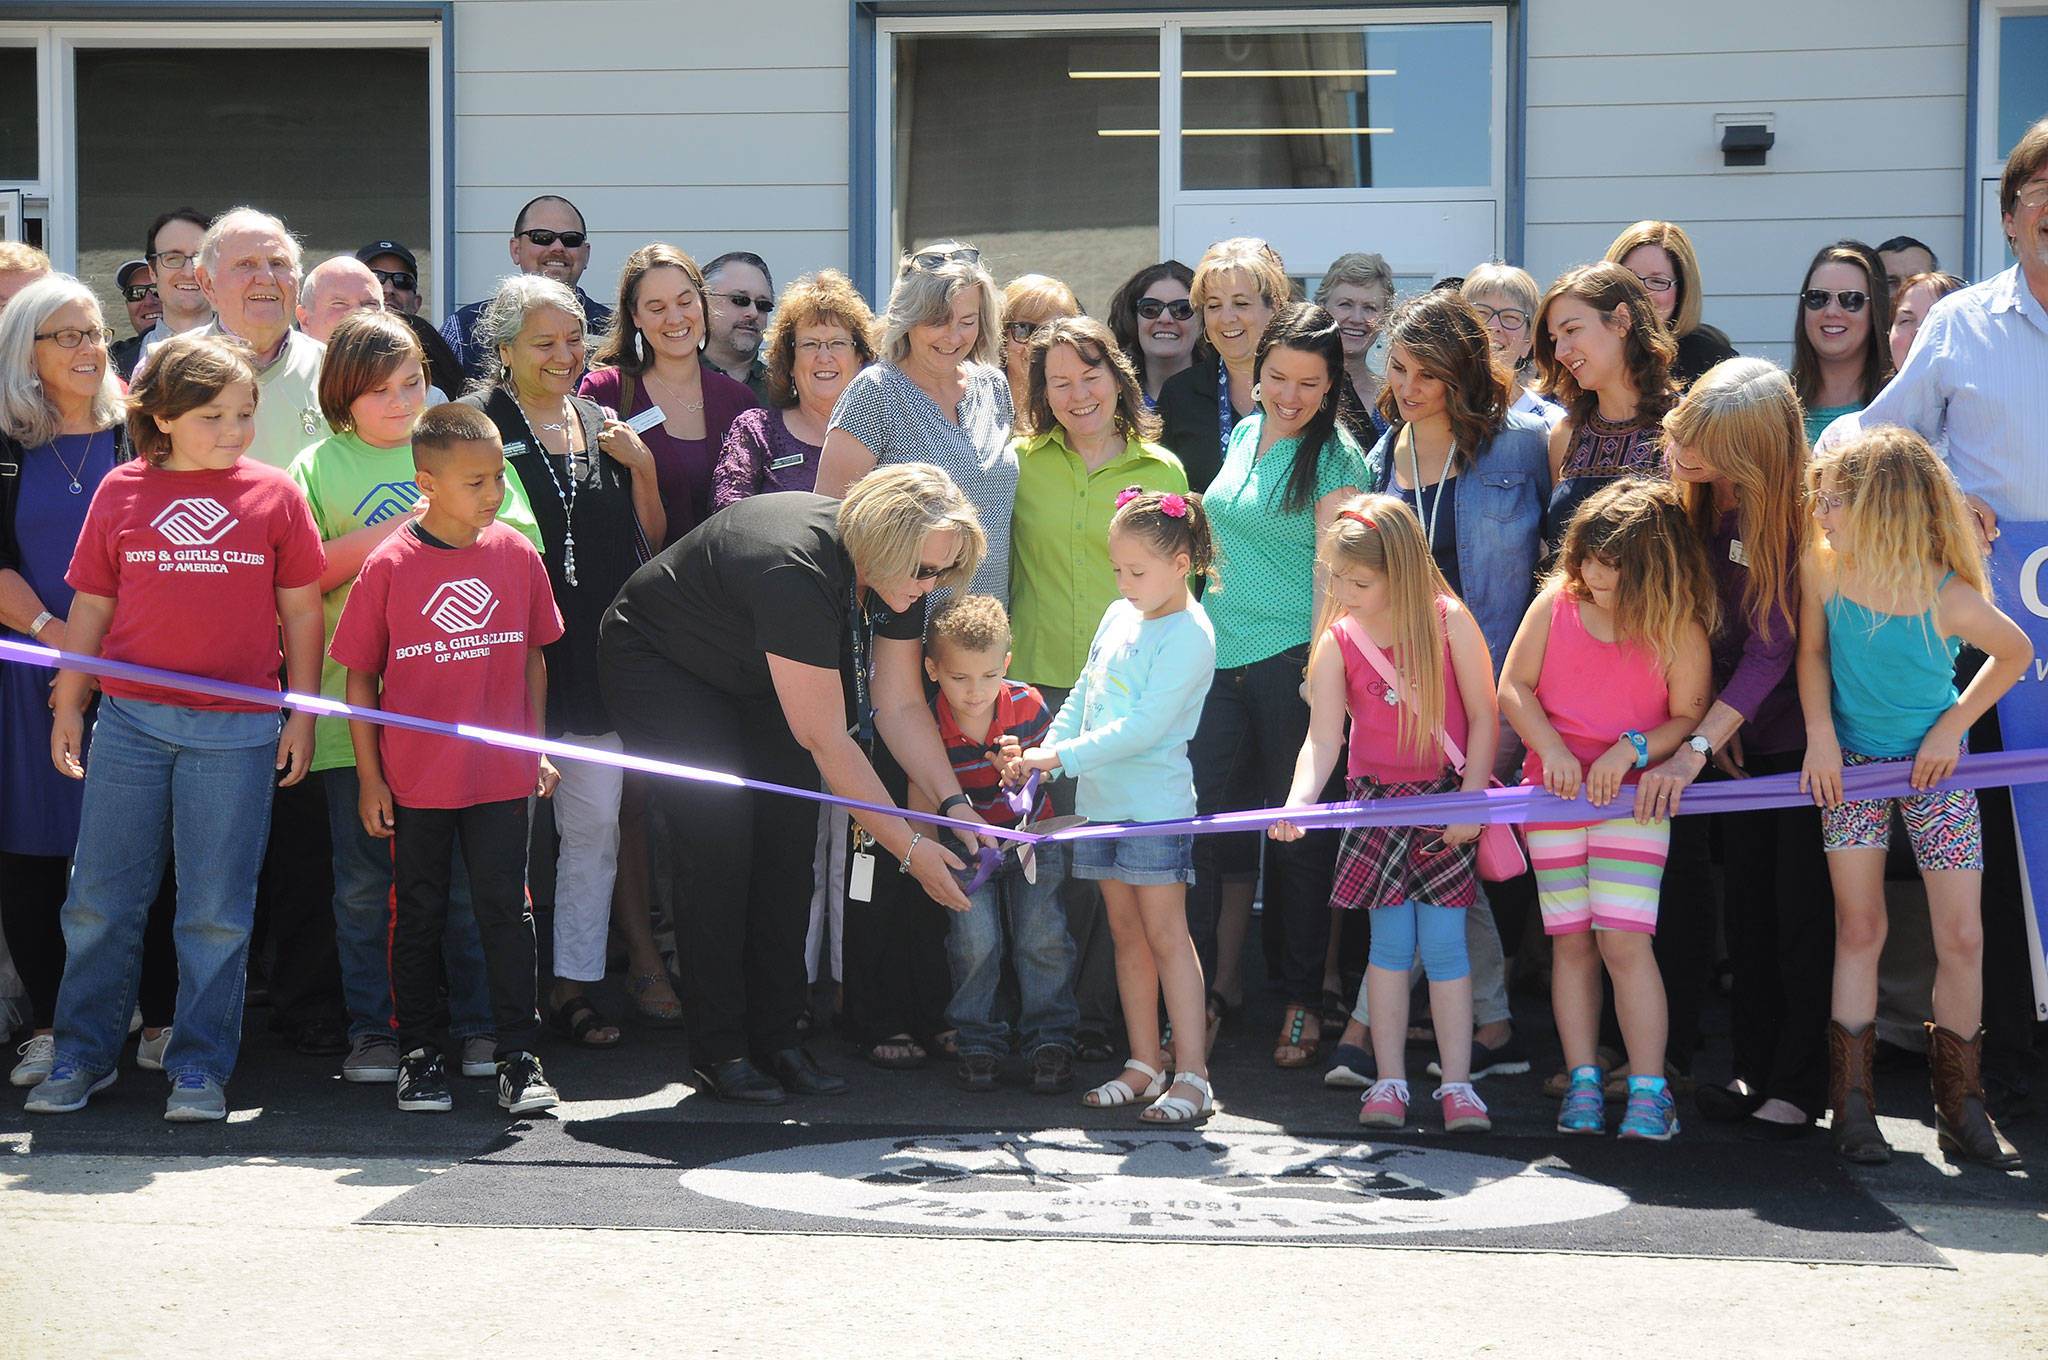 Greywolf Elementary School Principal Donna Hudson helps Bianca Lopez and Benjamin Smith with the ribbon-cutting at Greywolf Elementary School’s new kindergarten classroom building, constructed using cross-laminated timber, on Wednesday. (Michael Dashiell/Olympic Peninsula News Group)